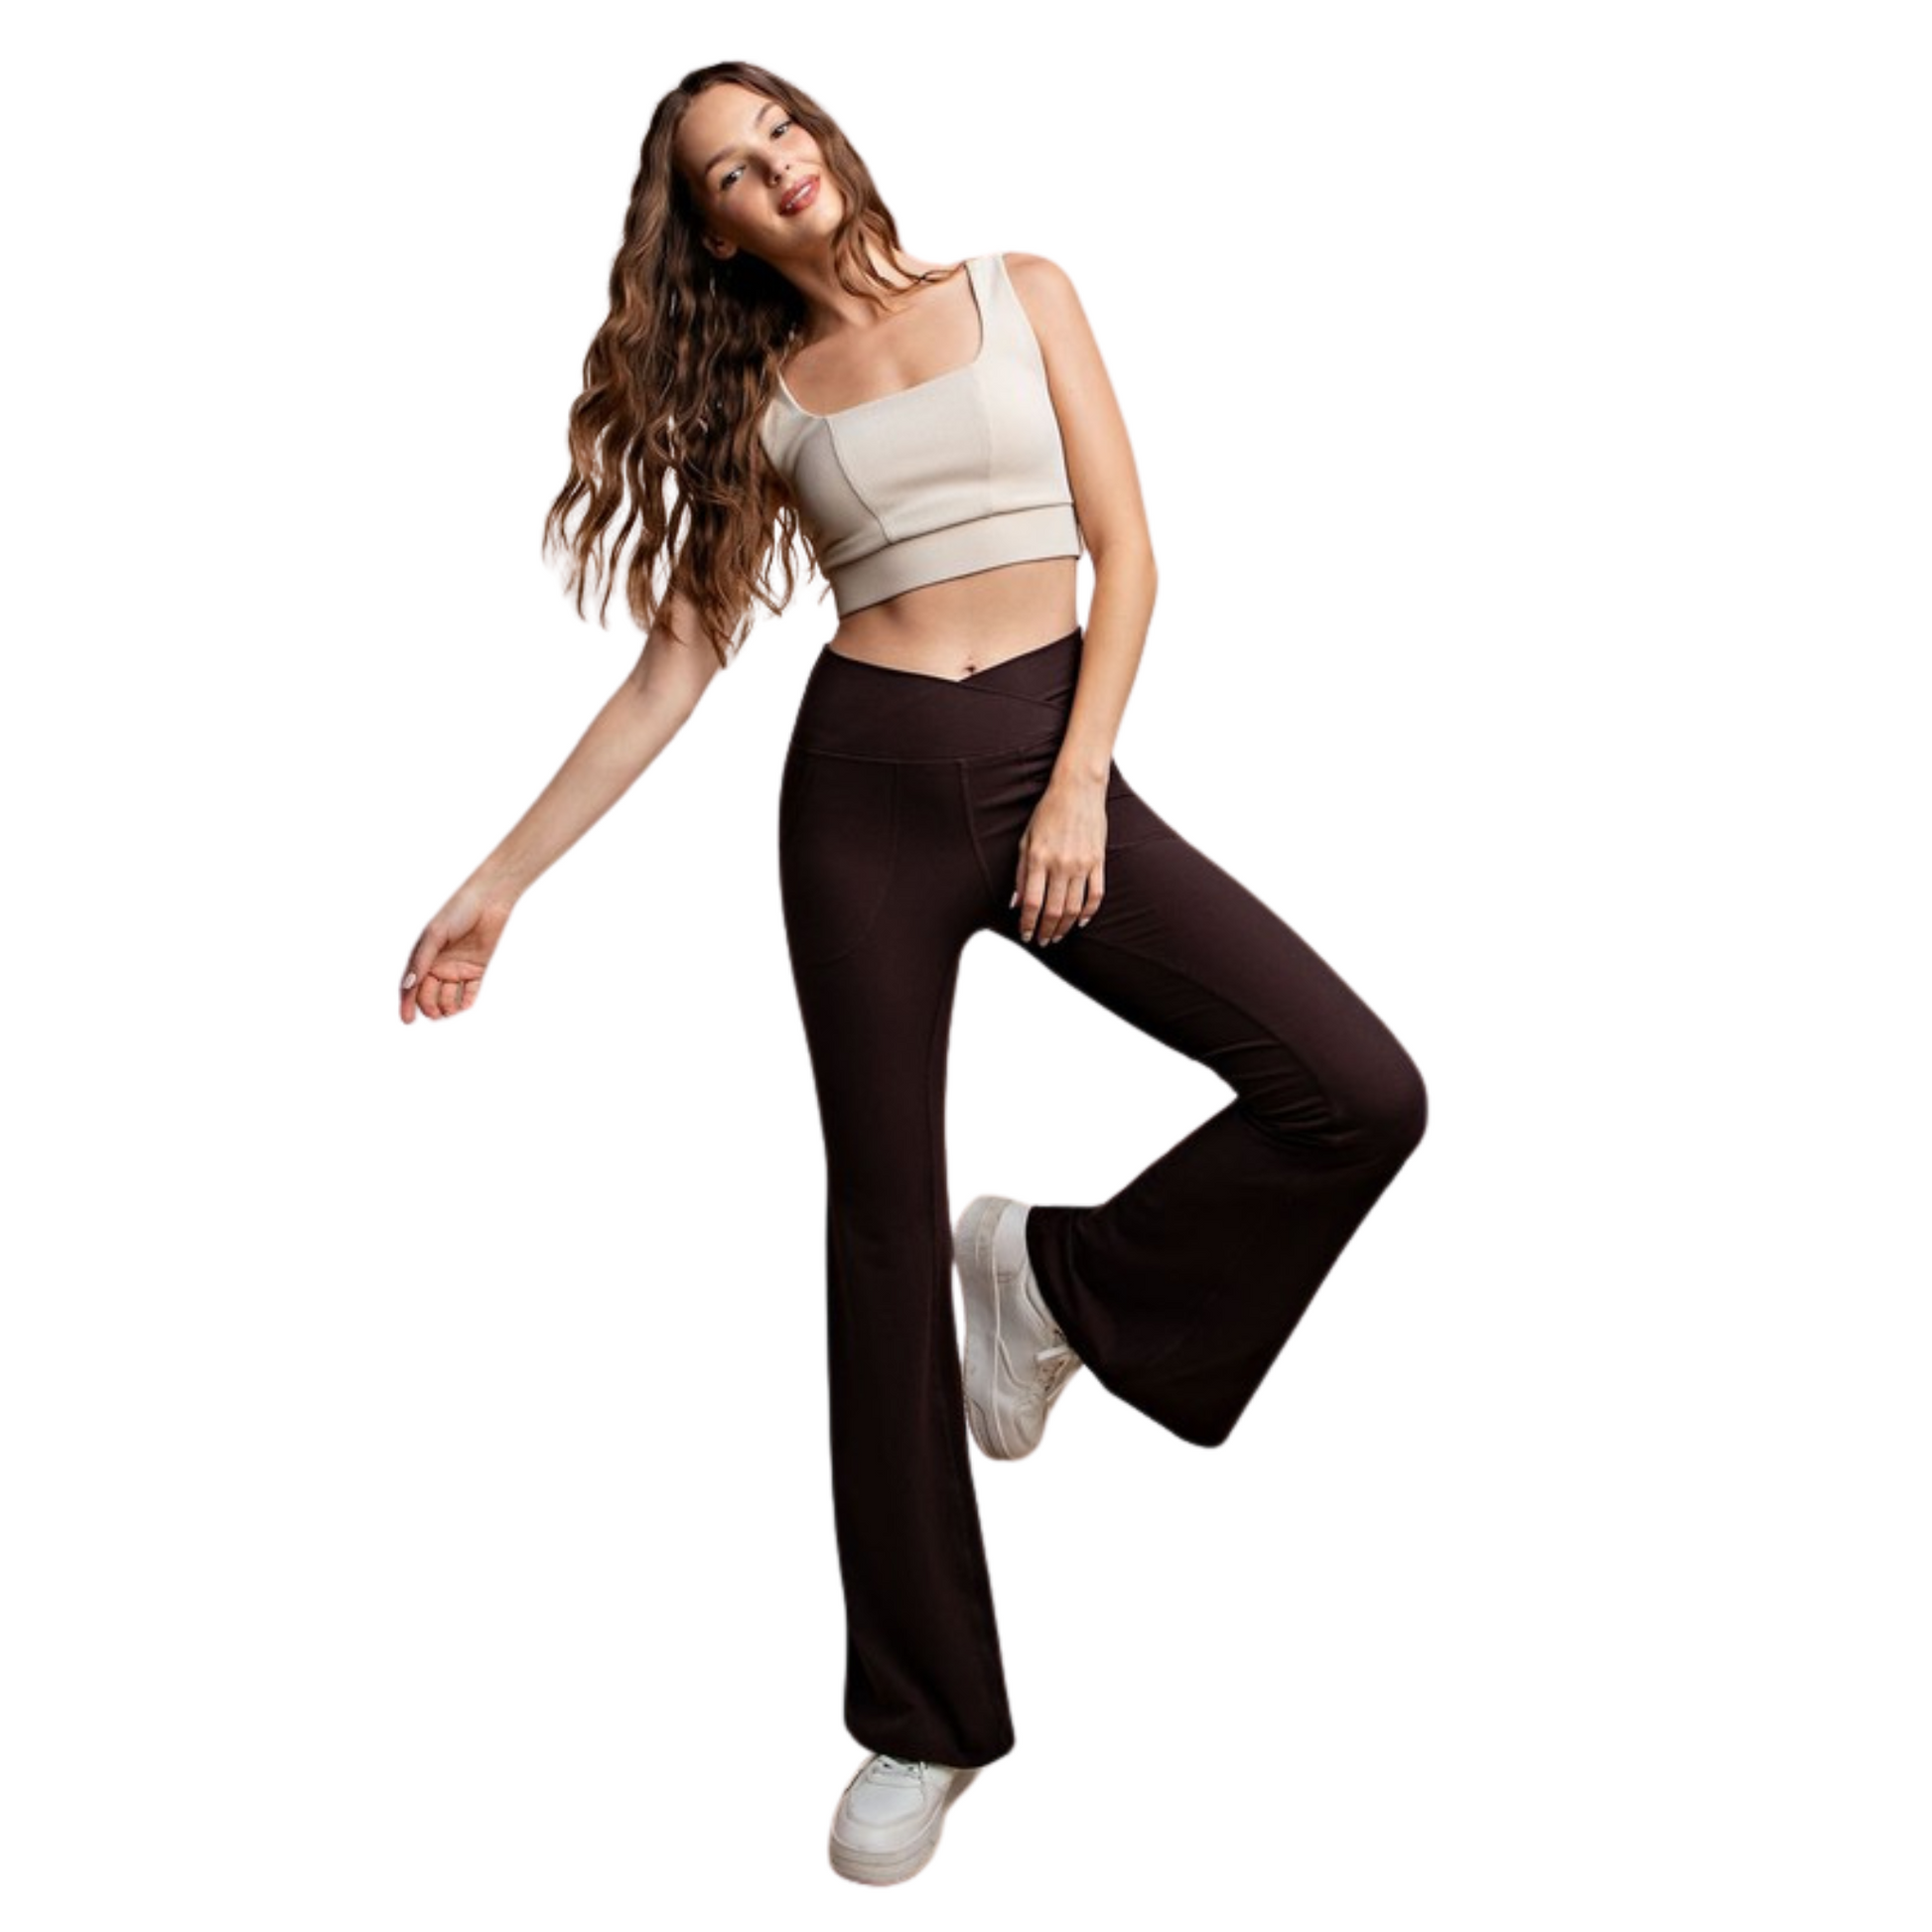 Experience ultimate comfort with our V Waist Flared Yoga Pants. Made with butter soft fabric, these pants offer a smooth and luxurious feel. Designed with a V waist for a flattering fit and flared bottoms for added style. Perfect for yoga with convenient pockets. Available in black.